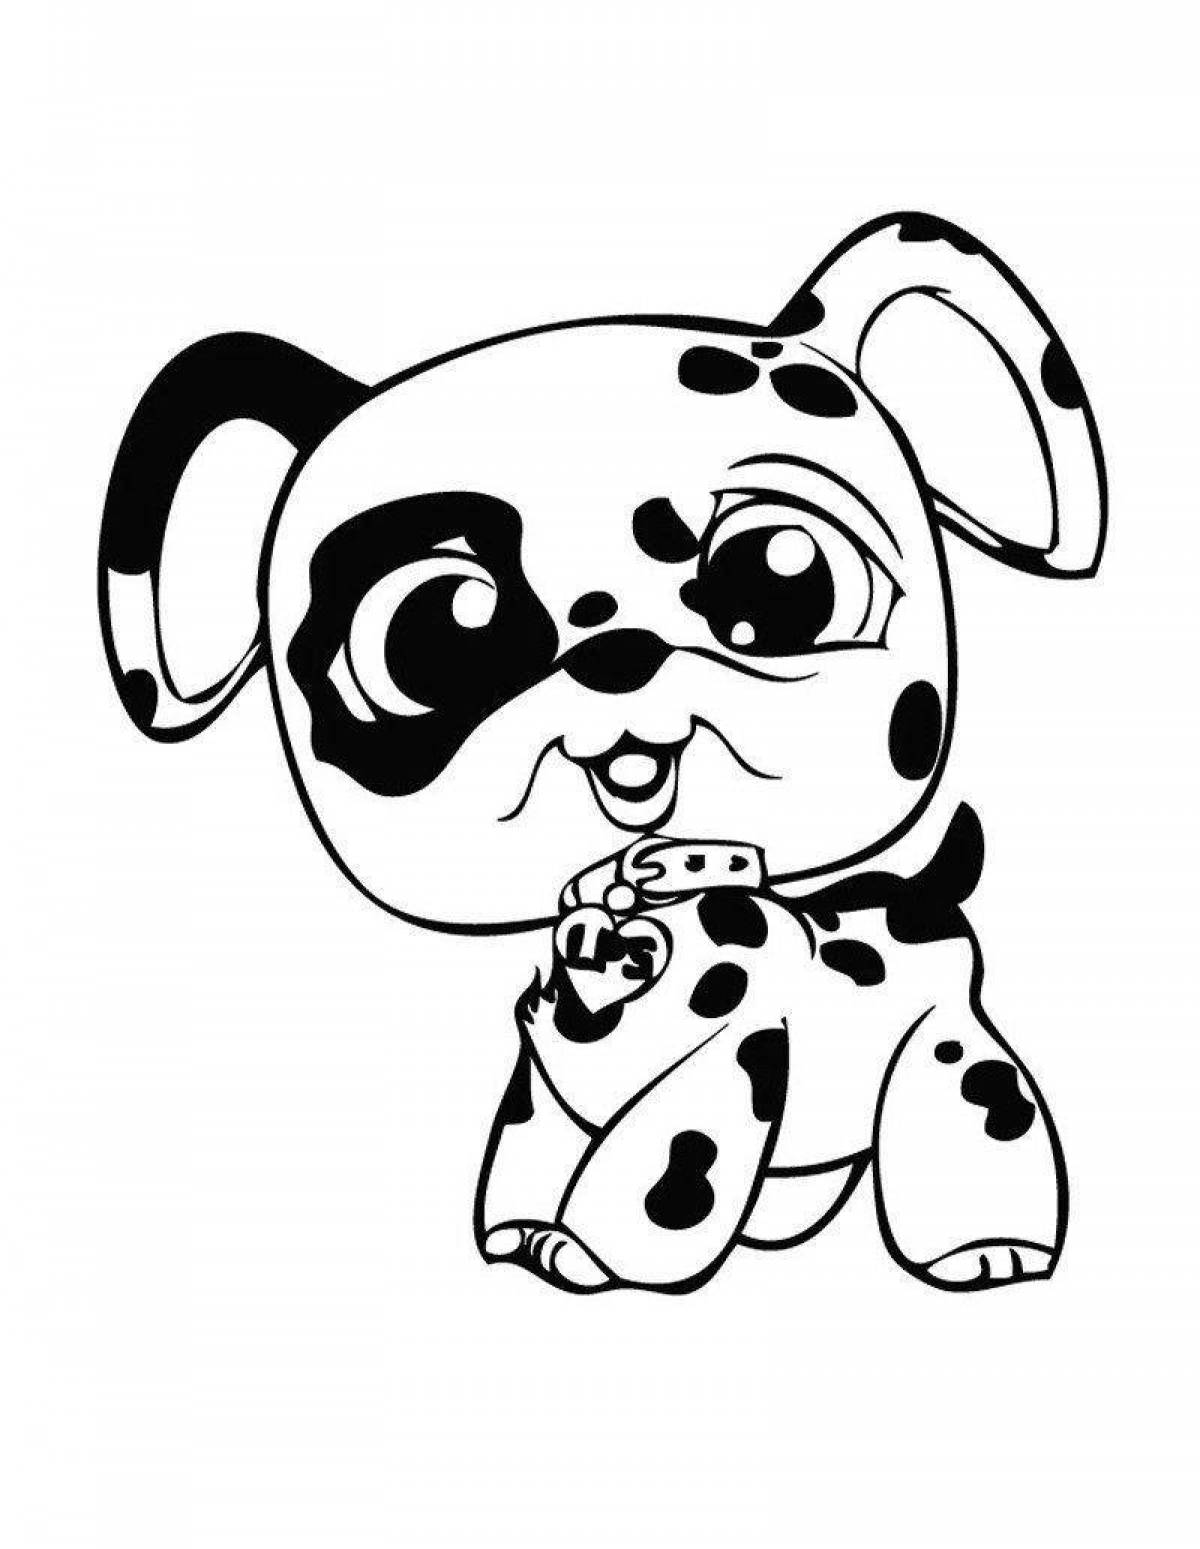 Cute and cute dog coloring book